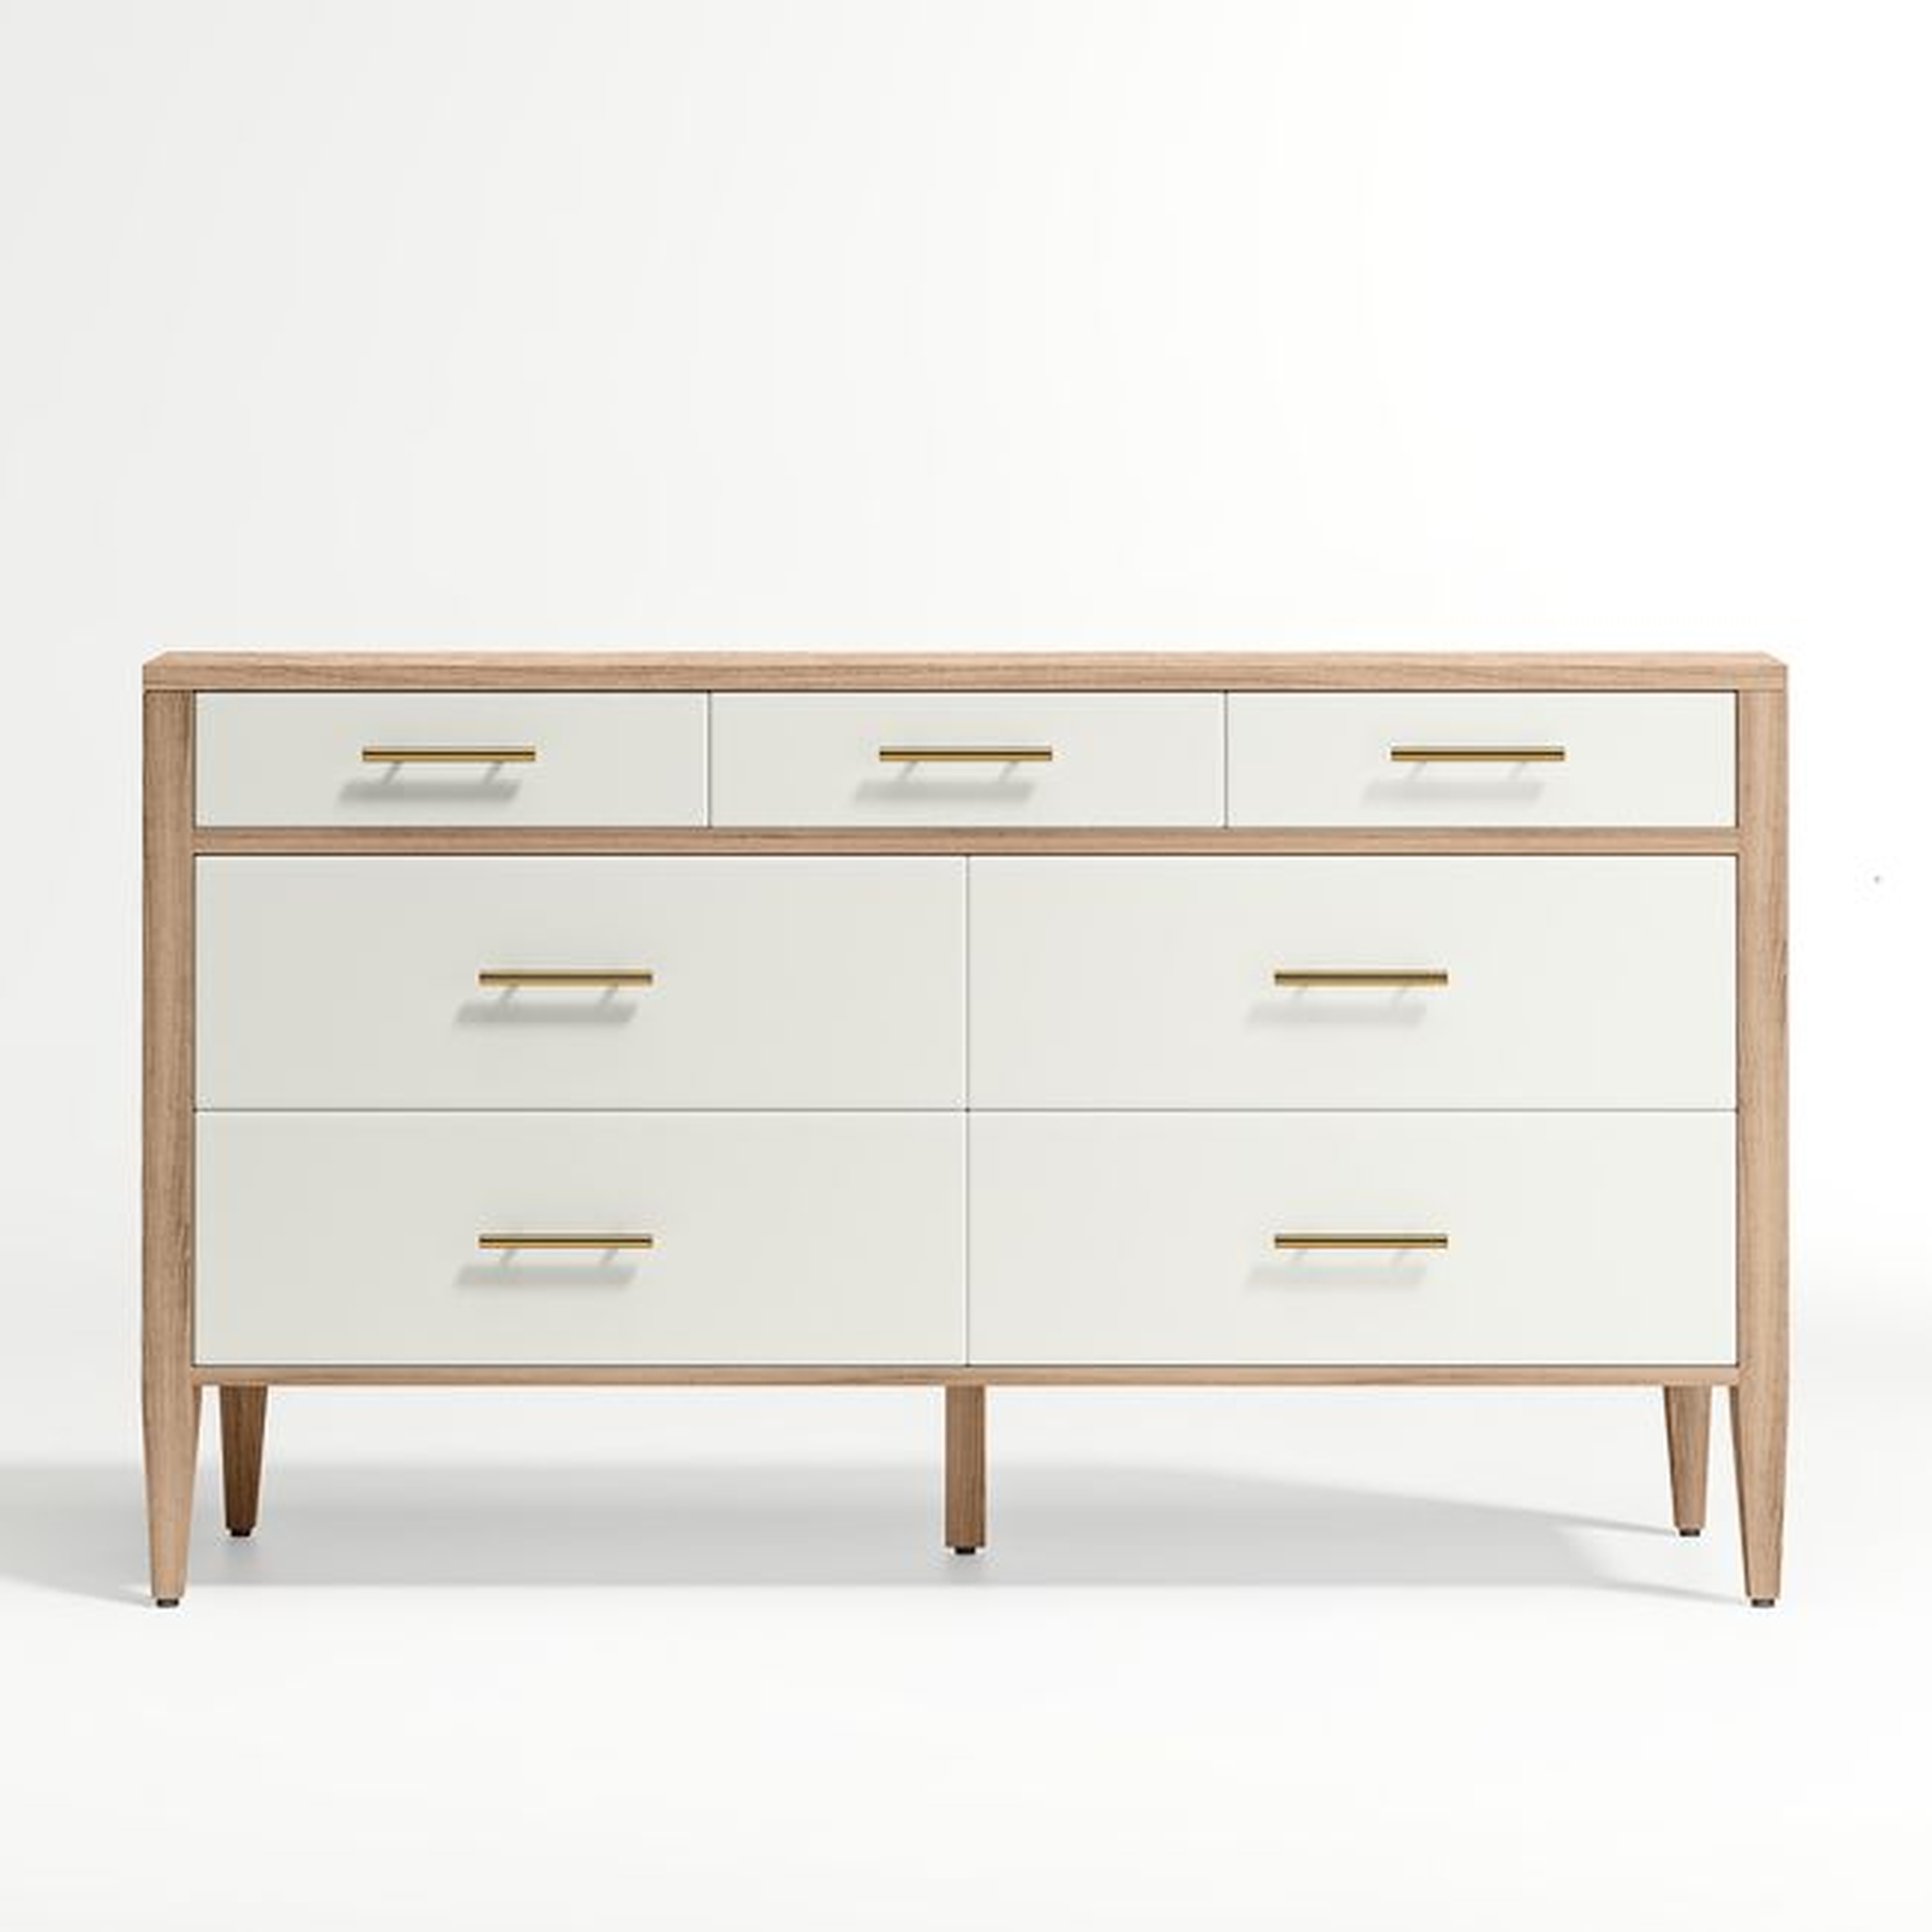 Rio 7-Drawer Dresser - Crate and Barrel